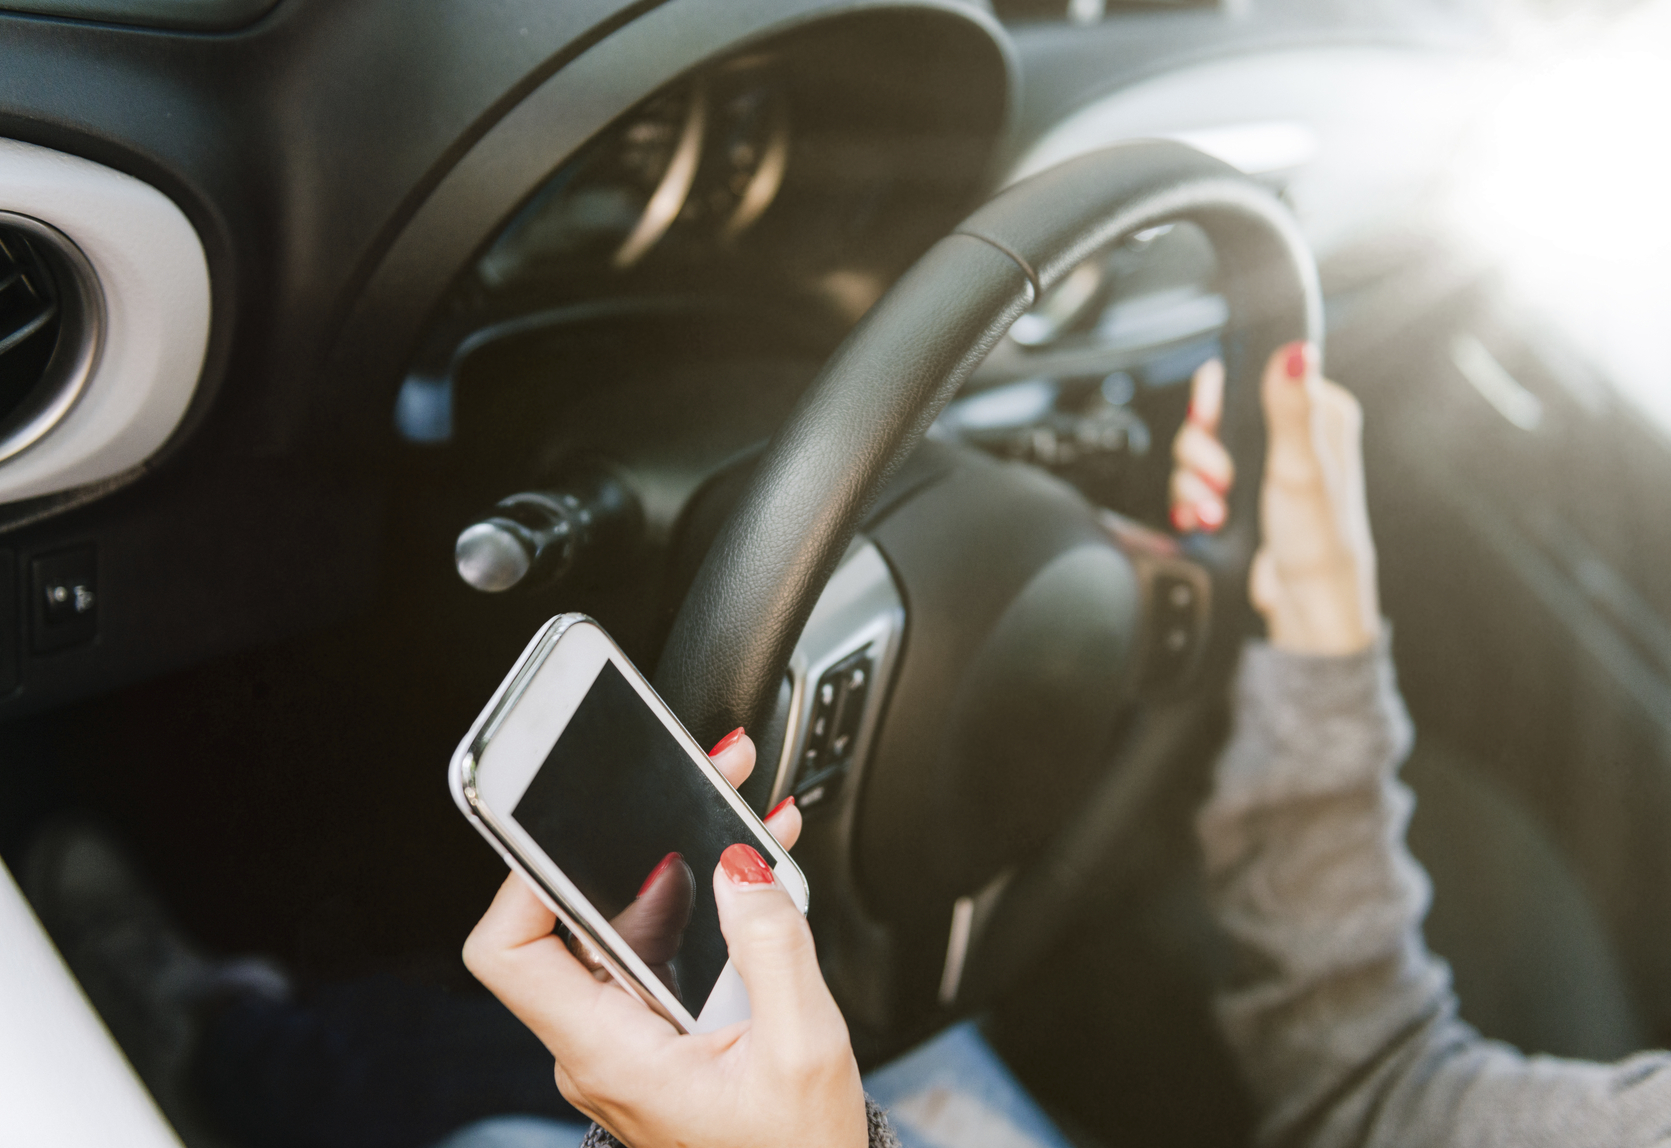 Texting While Driving is Dangerous, and It’s Getting Worse